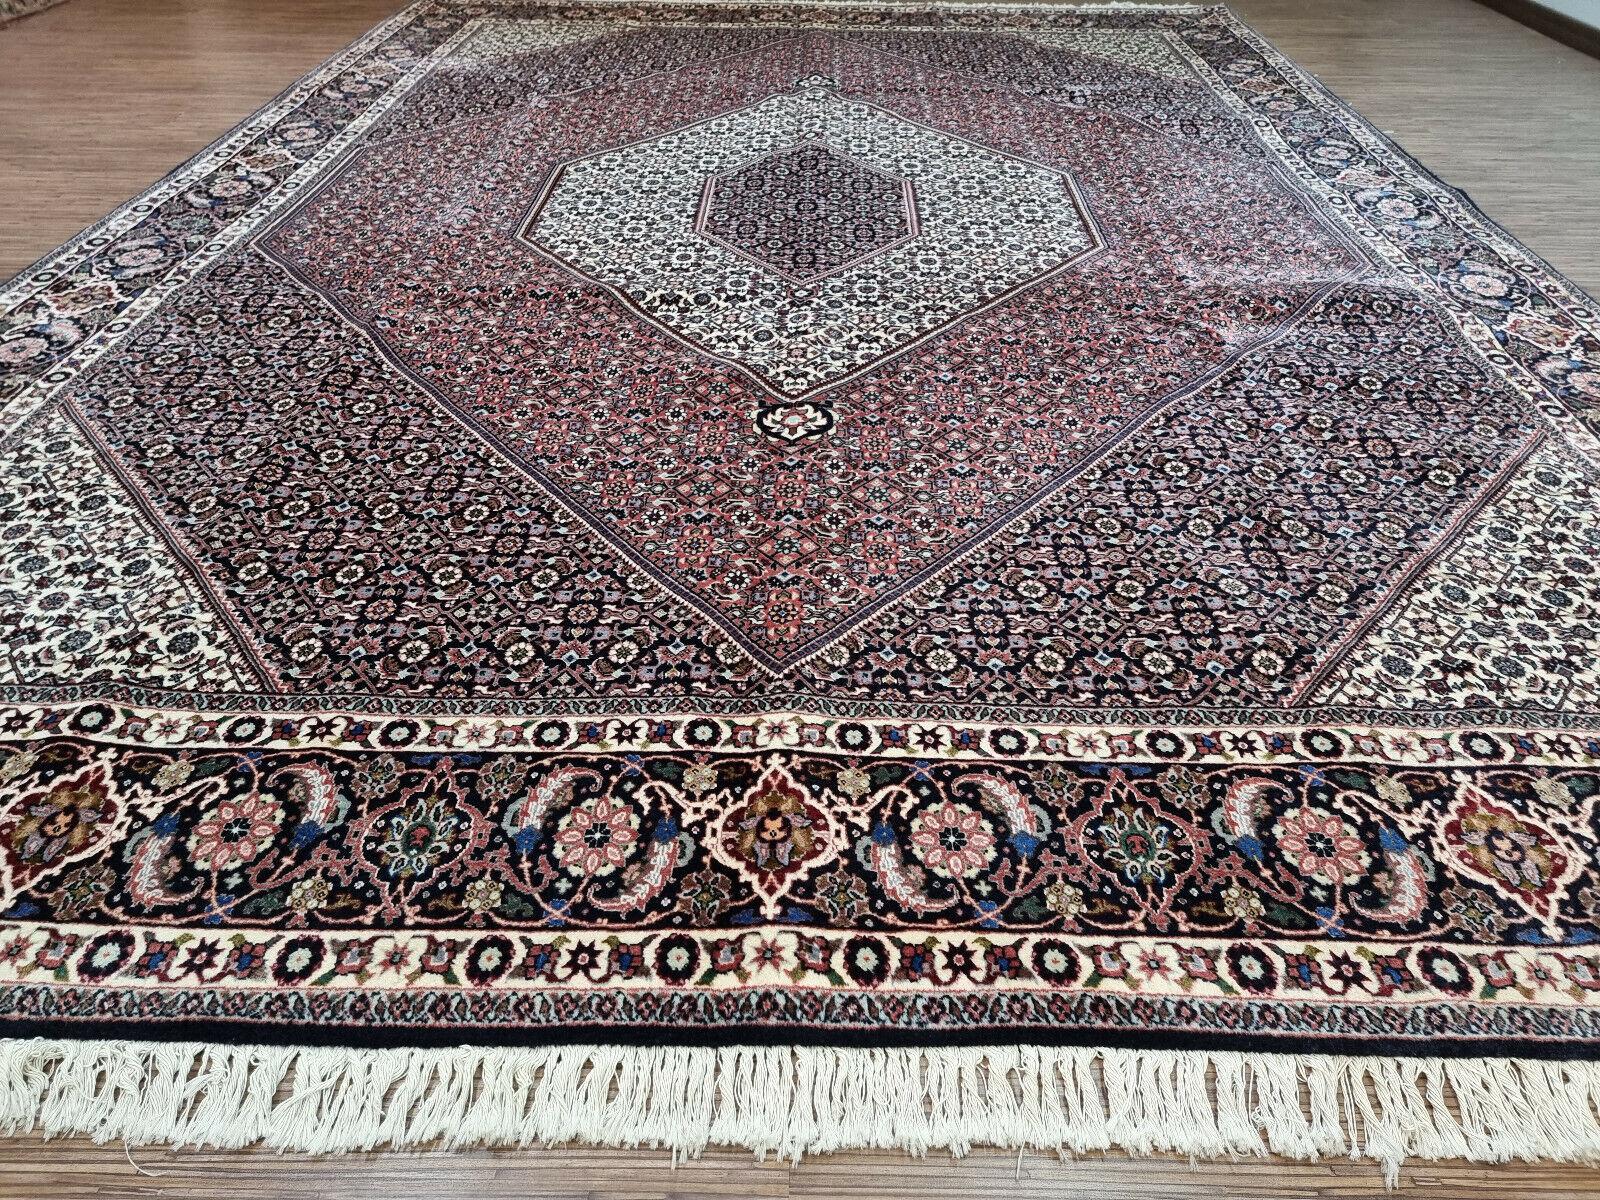 Hand-Knotted Handmade Vintage Persian Style Bidjar Rug 8.2' x 11.2', 1970s - 1D71 For Sale